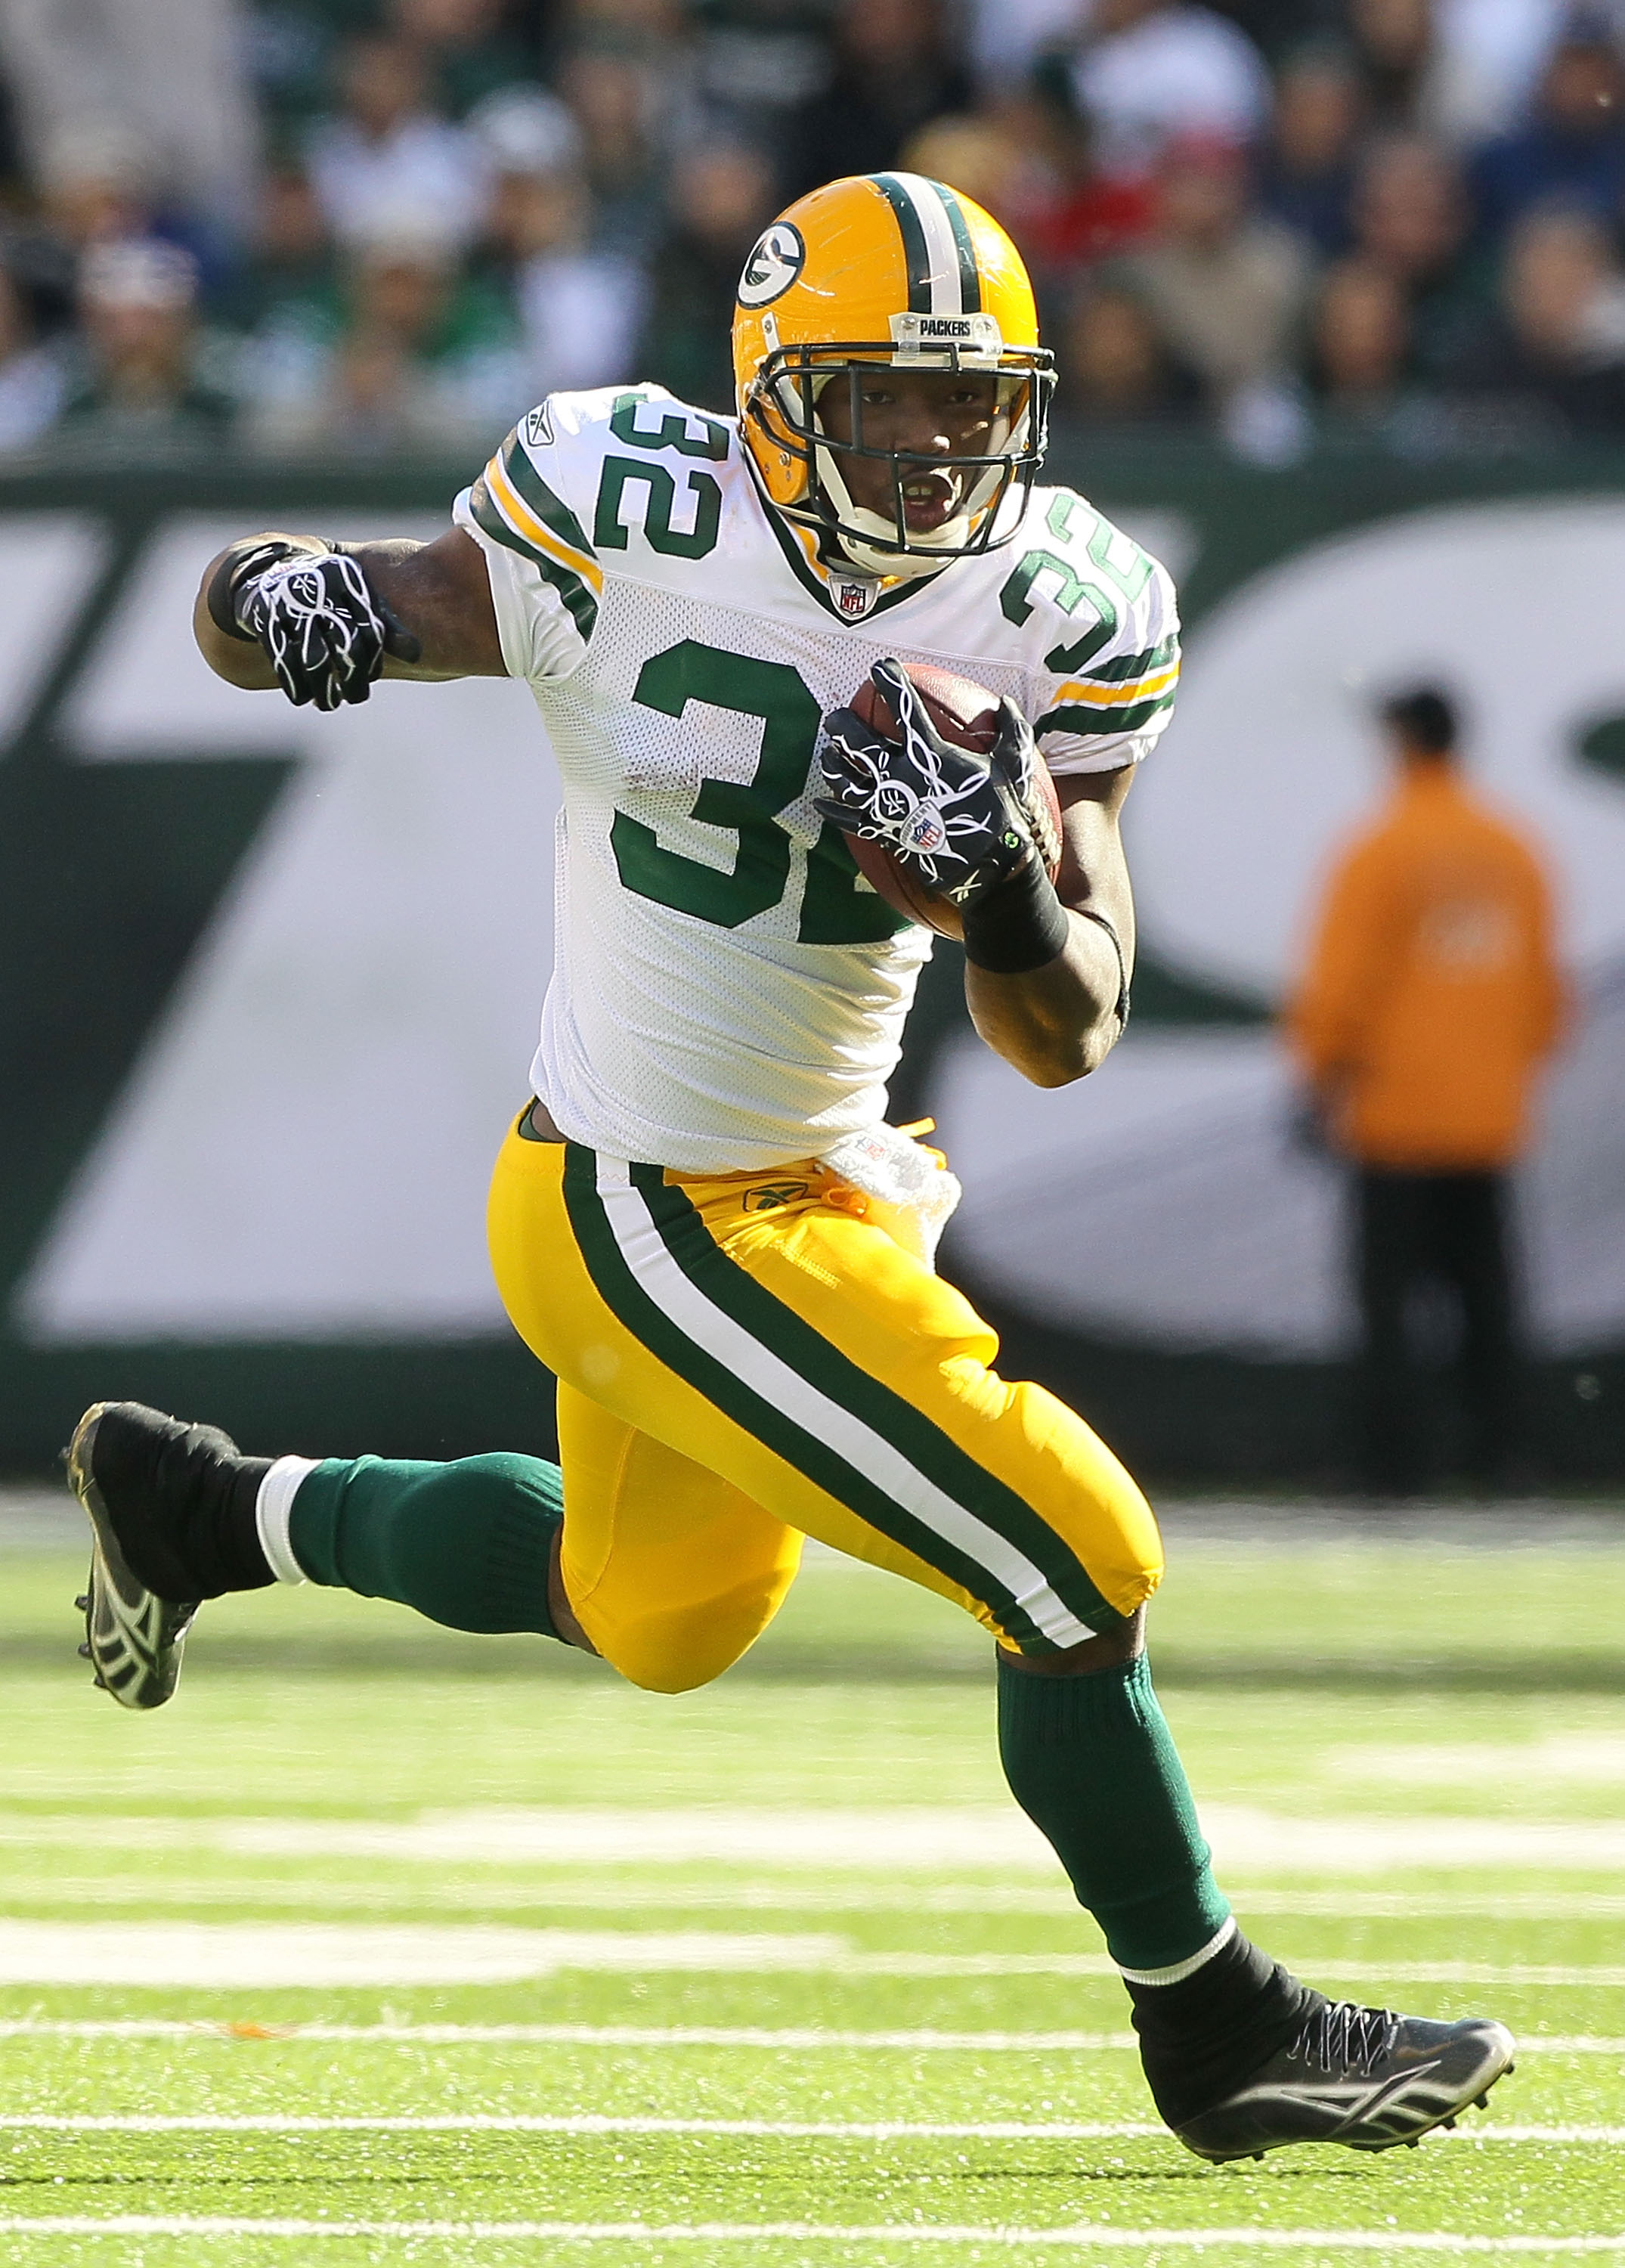 EAST RUTHERFORD, NJ - OCTOBER 31:  Brandon Jackson #32 of the Green Bay Packers runs the ball against the New York Jets on October 31, 2010 at the New Meadowlands Stadium in East Rutherford, New Jersey.  (Photo by Jim McIsaac/Getty Images)